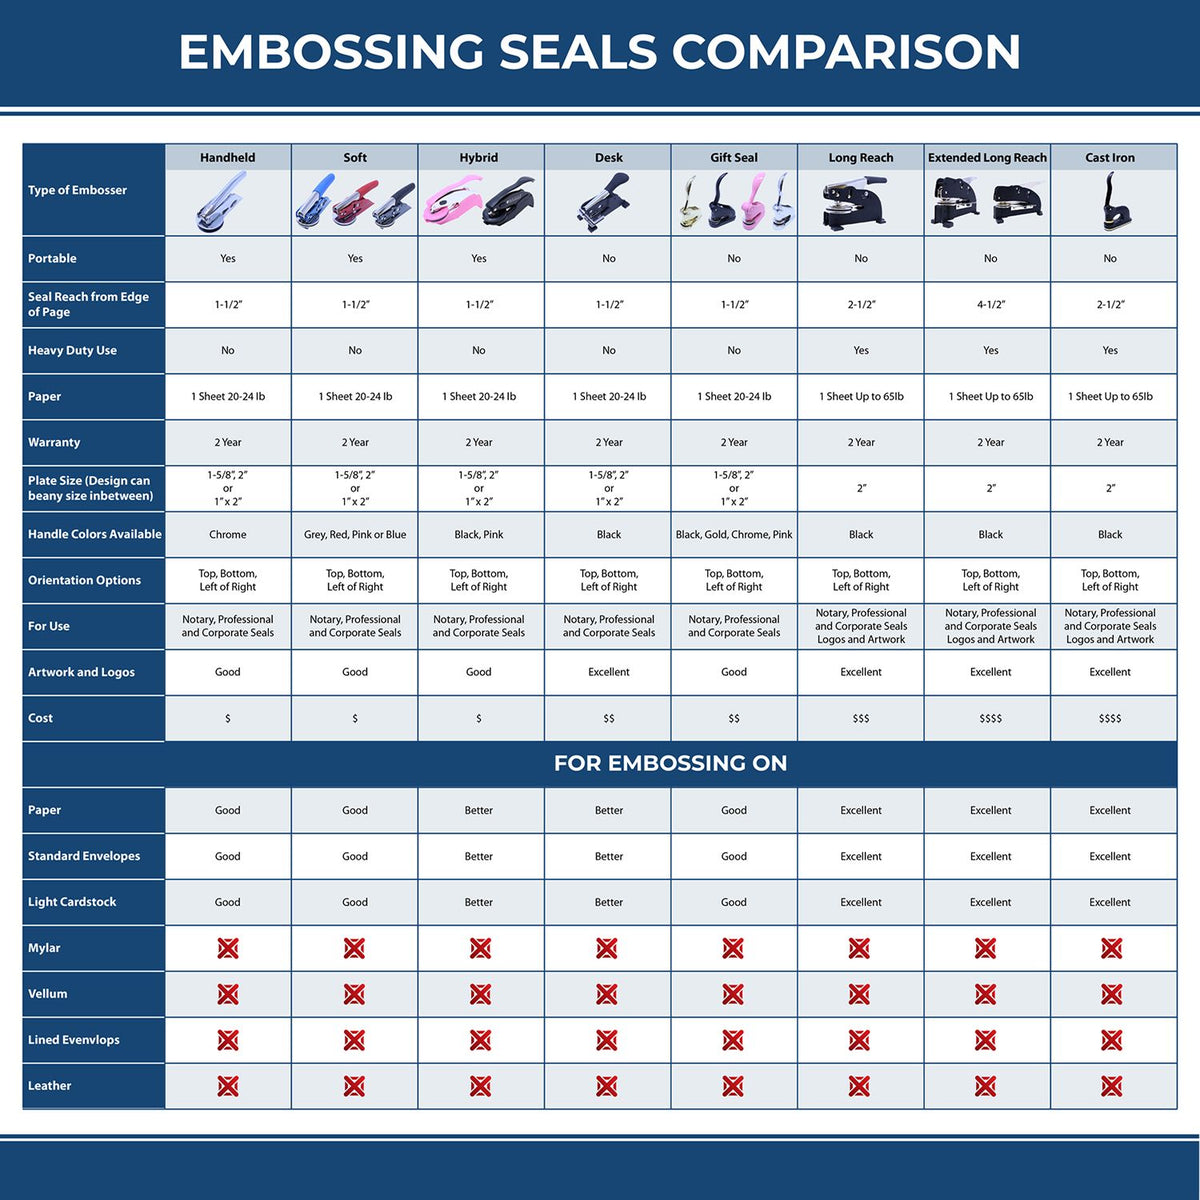 A comparison chart for the different types of mount models available for the Gift Indiana Land Surveyor Seal